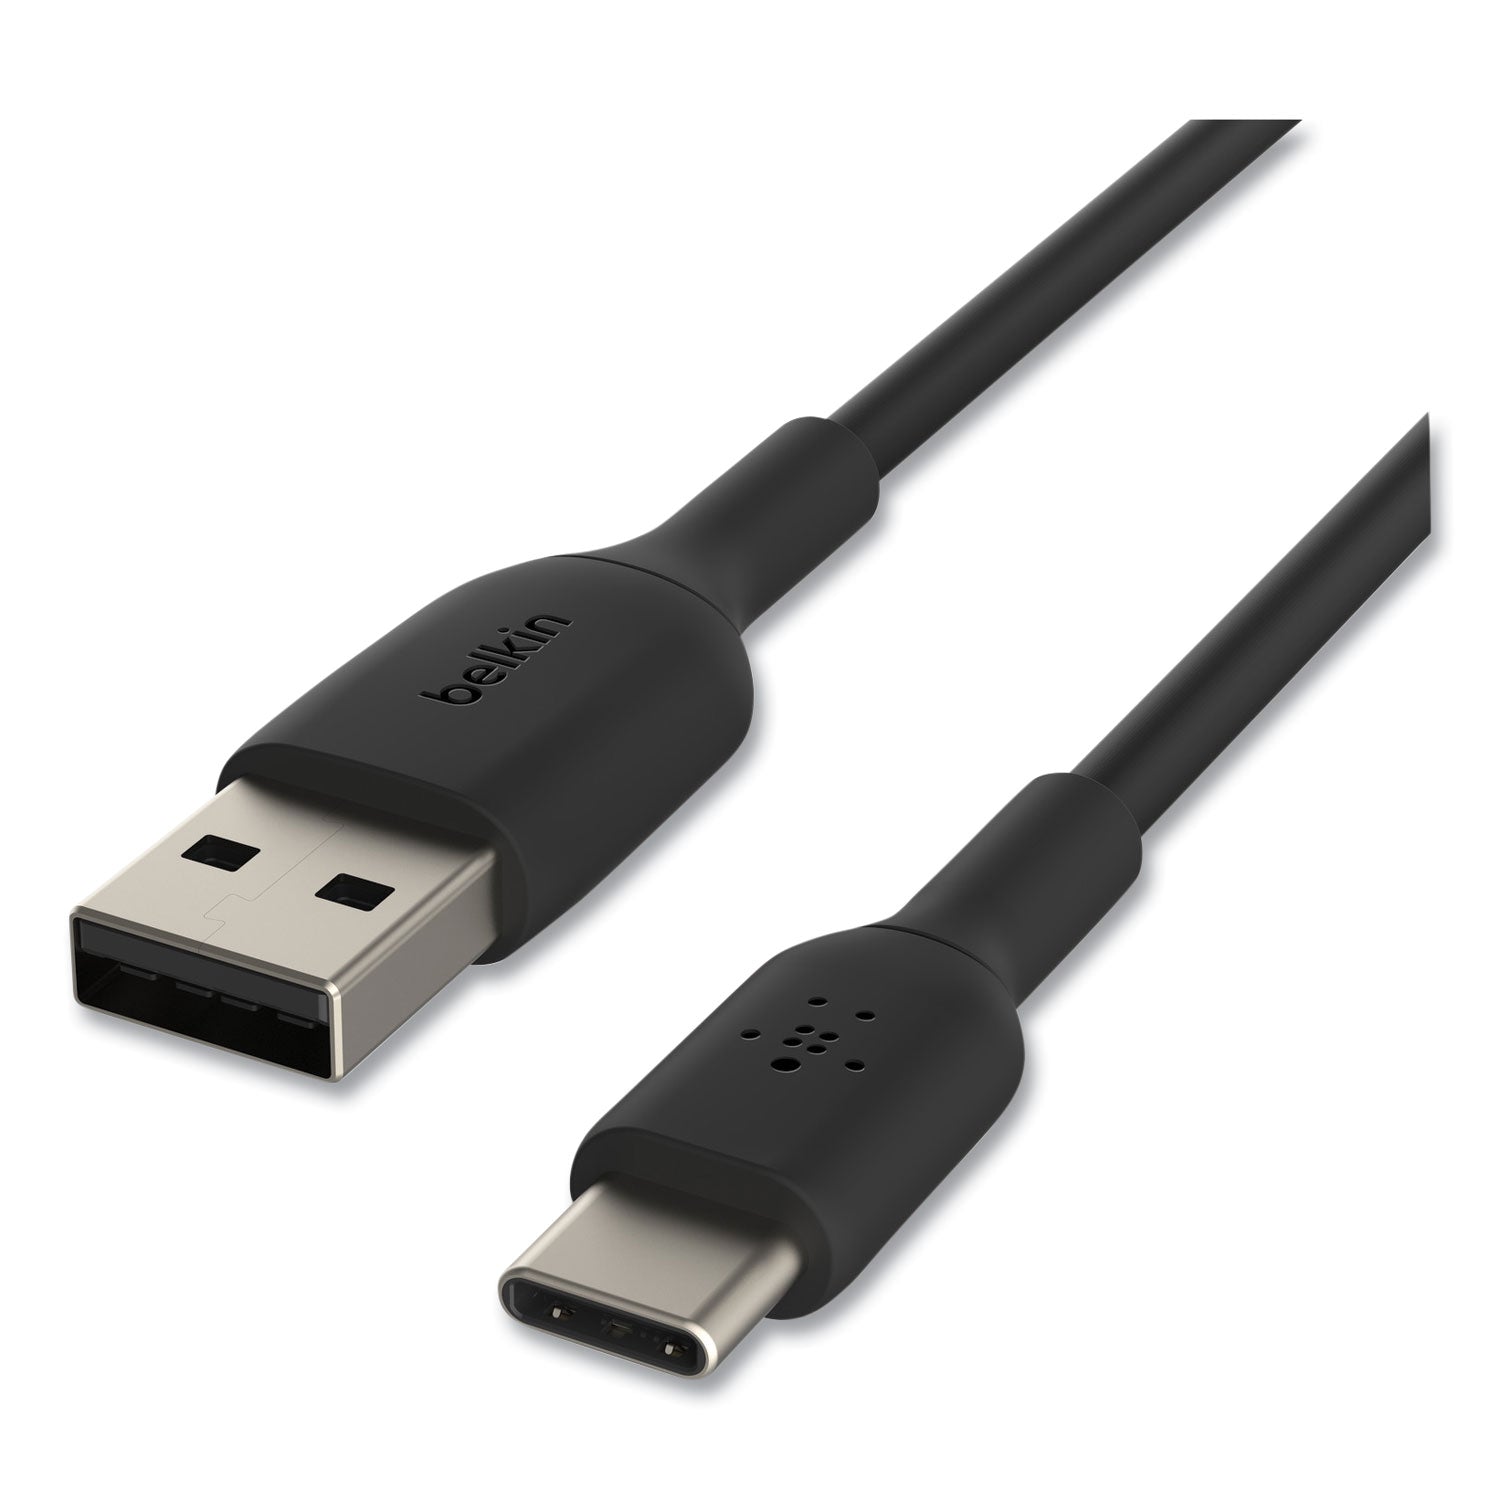 boost-charge-usb-c-to-usb-a-chargesync-cable-33-ft-black_blkcab001bt1mbk - 4